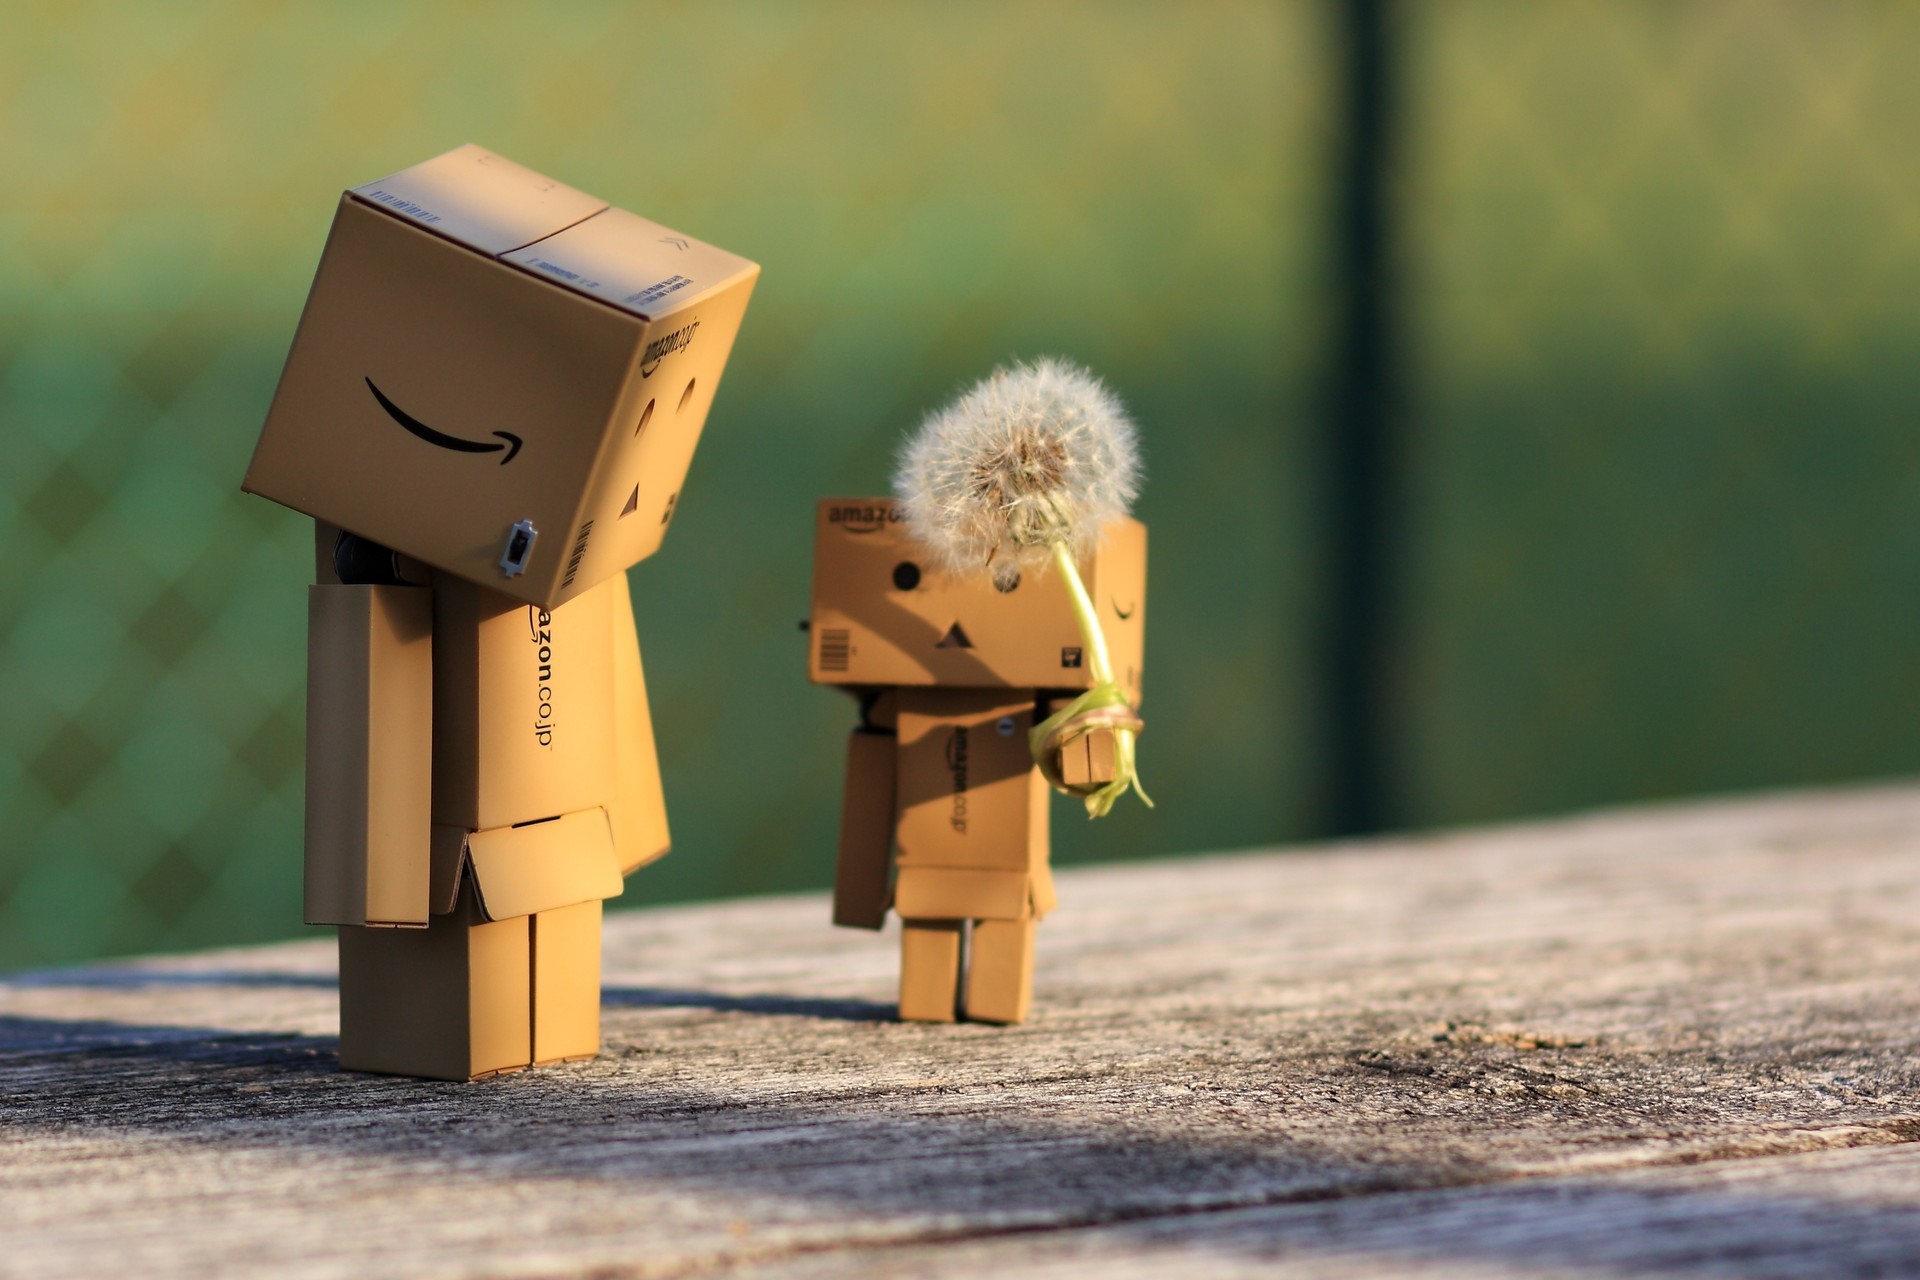 118112 download wallpaper miscellanea, miscellaneous, danbo, cardboard robot, dandelion screensavers and pictures for free